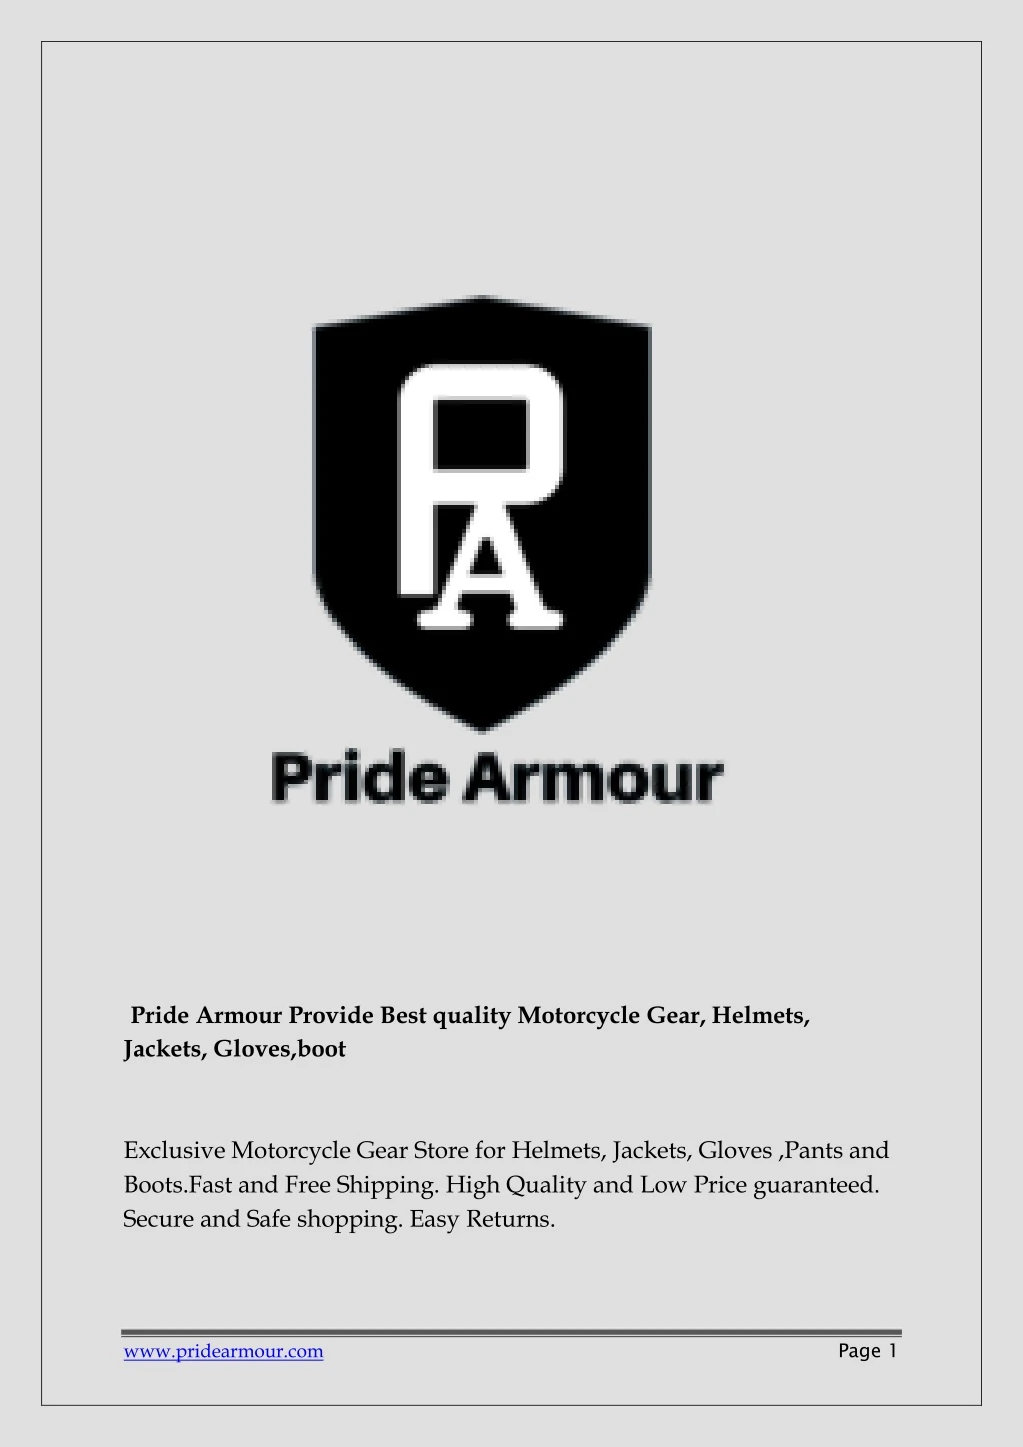 pride armour provide best quality motorcycle gear